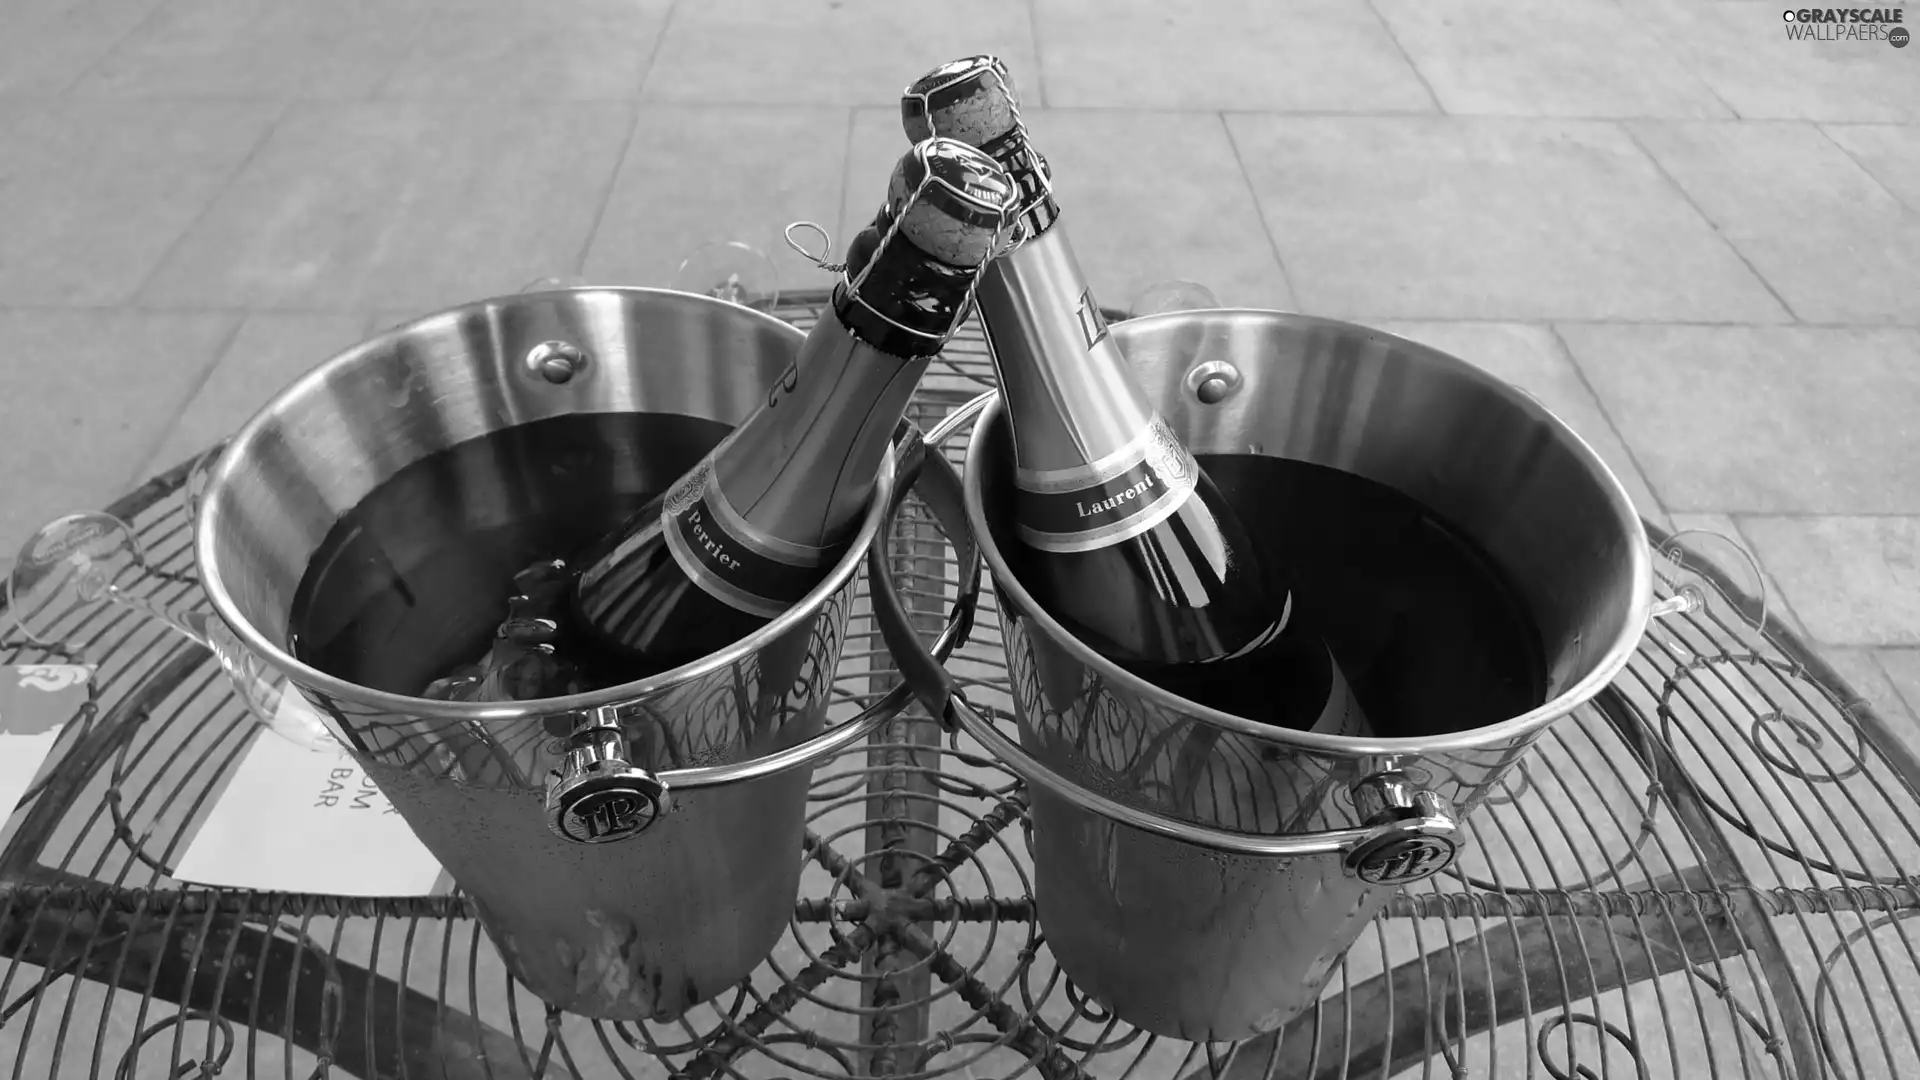 Buckets, Chilled, Champagne